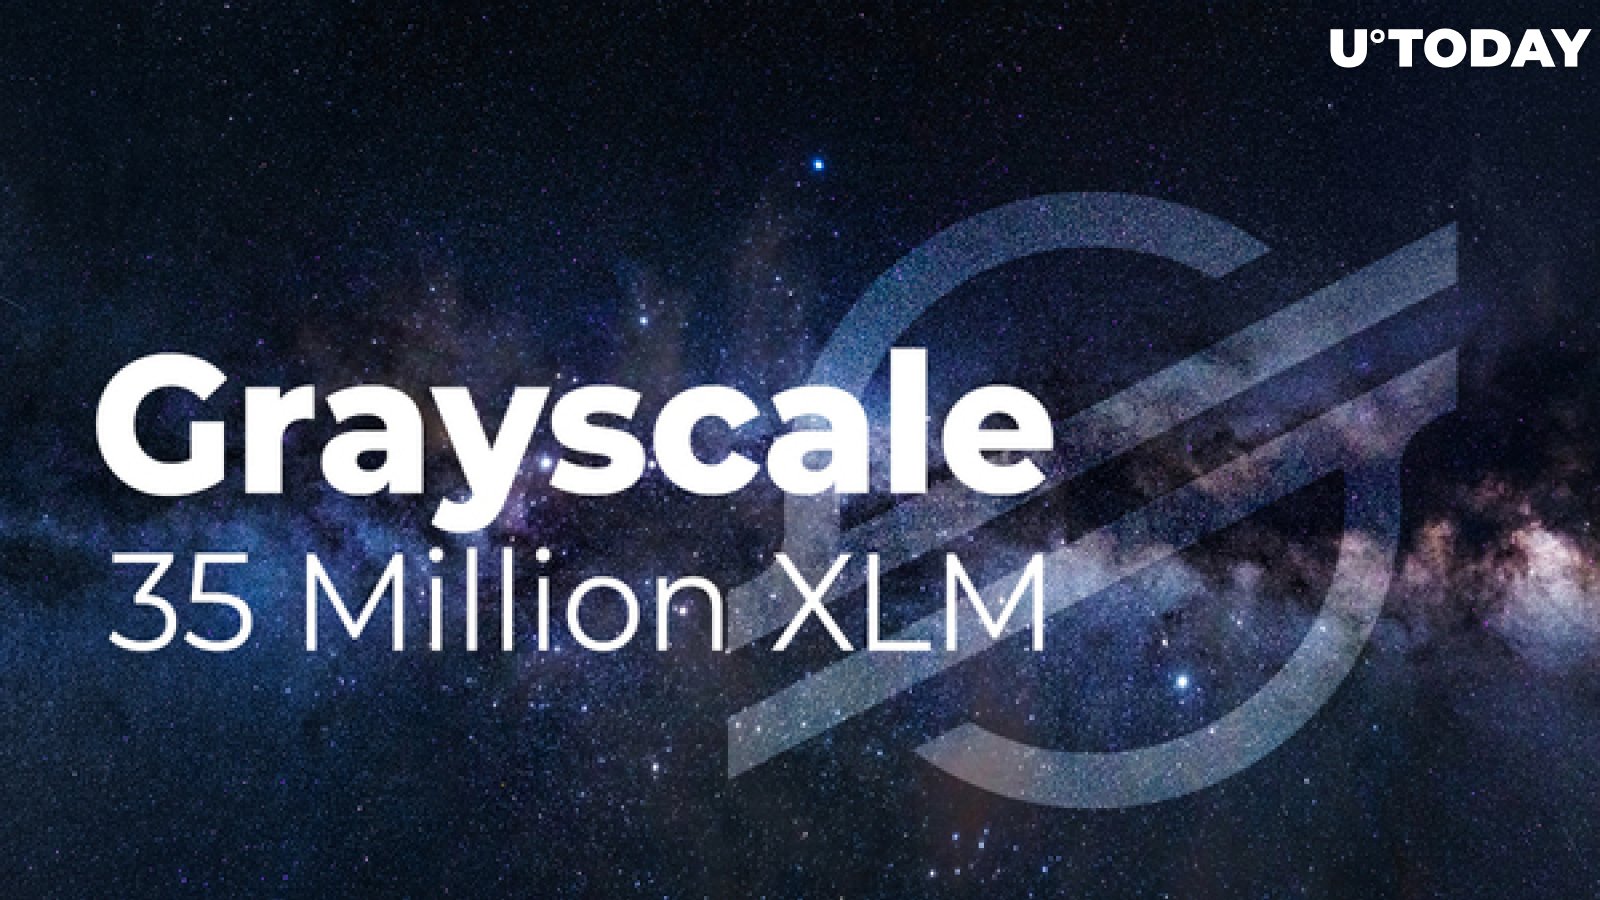 Grayscale Acquires Almost 35 Million XLM as Institutional Interest in Stellar Grows